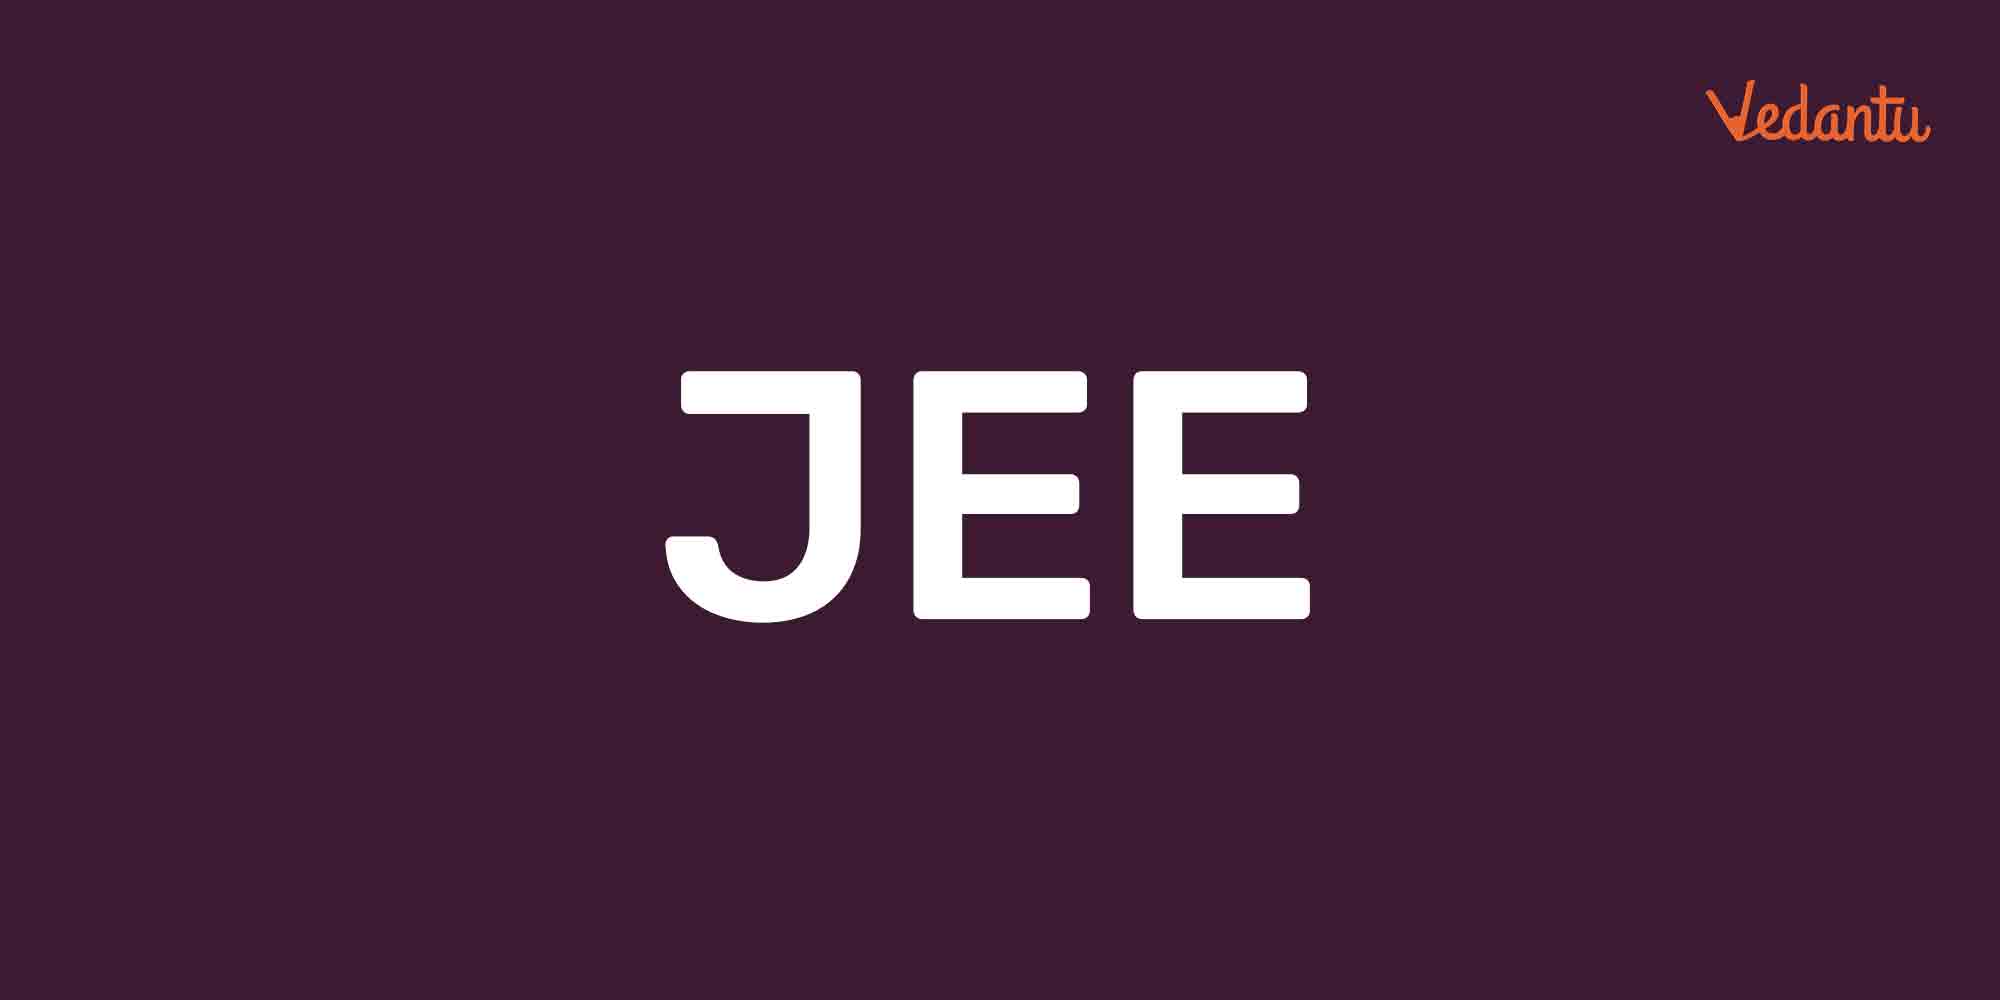 Click here to get JEE Mains Preparation Time Table 2023